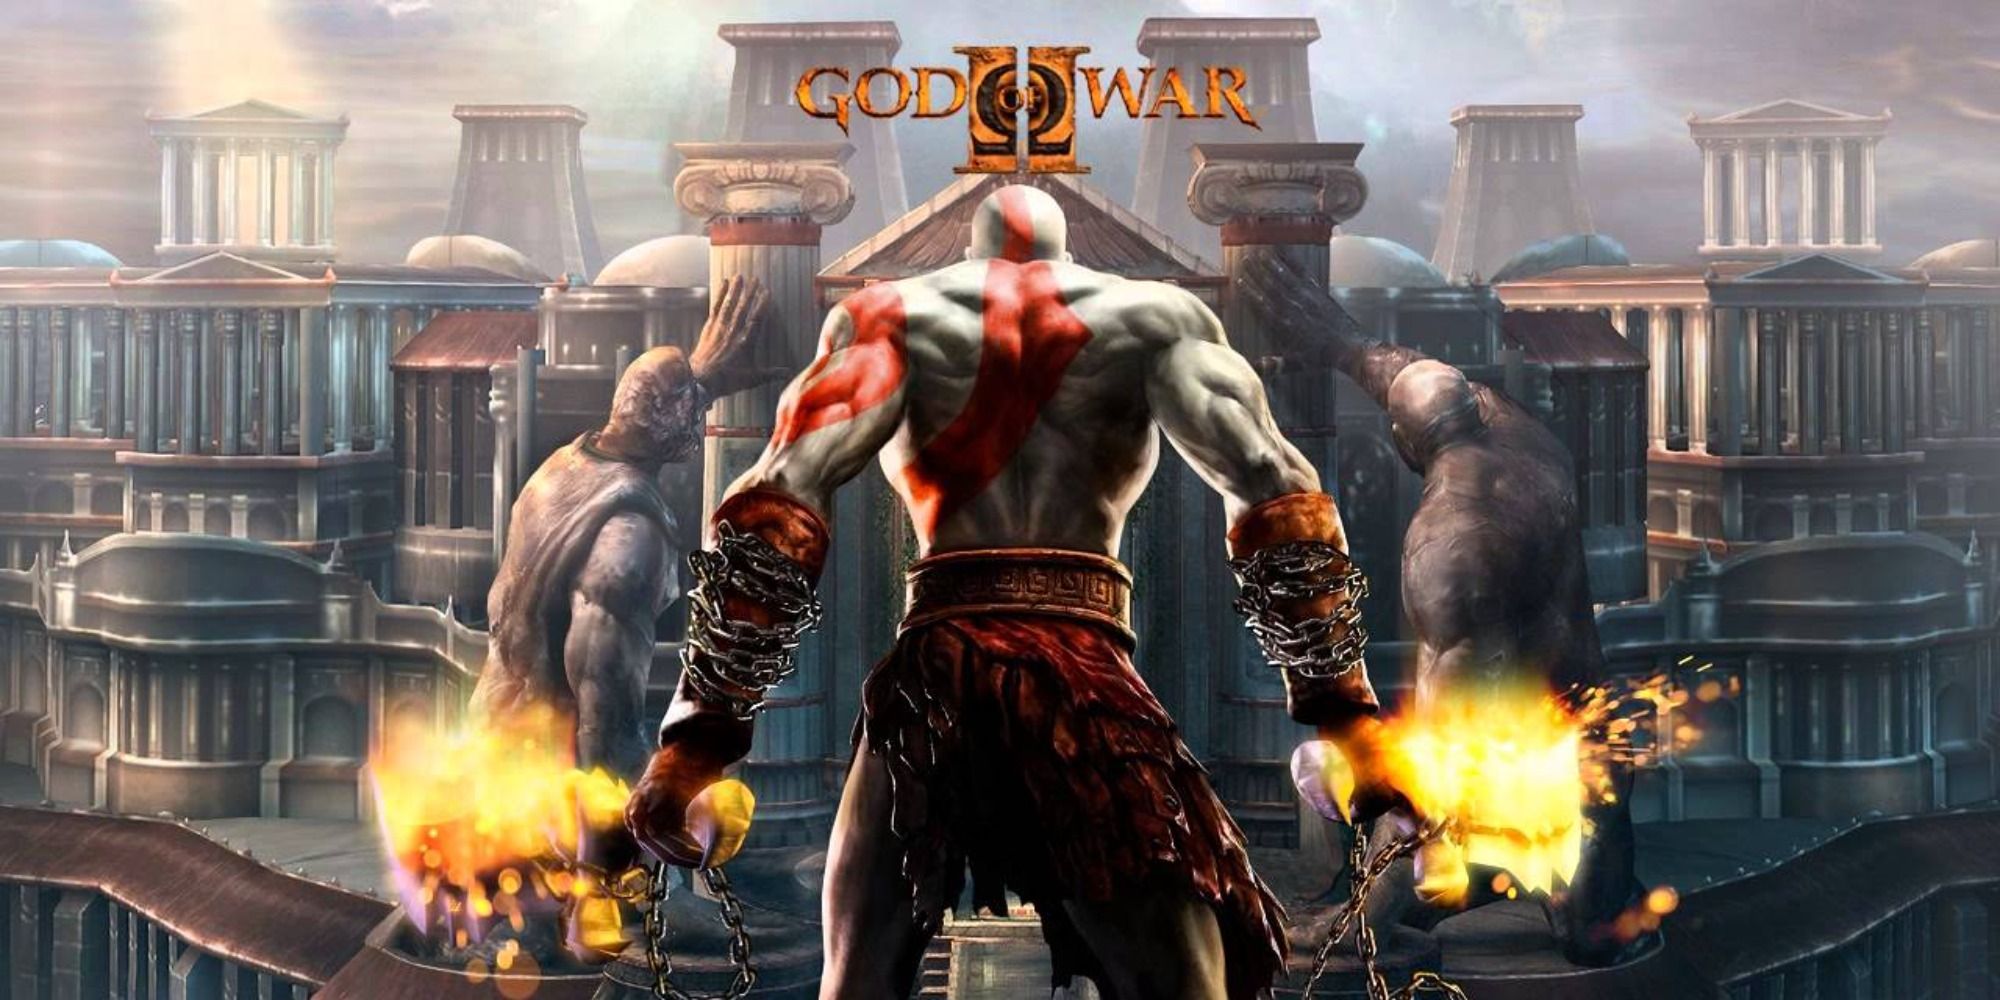 An image of Kratos on the God of War II game front cover. He is seen looking towards the city.